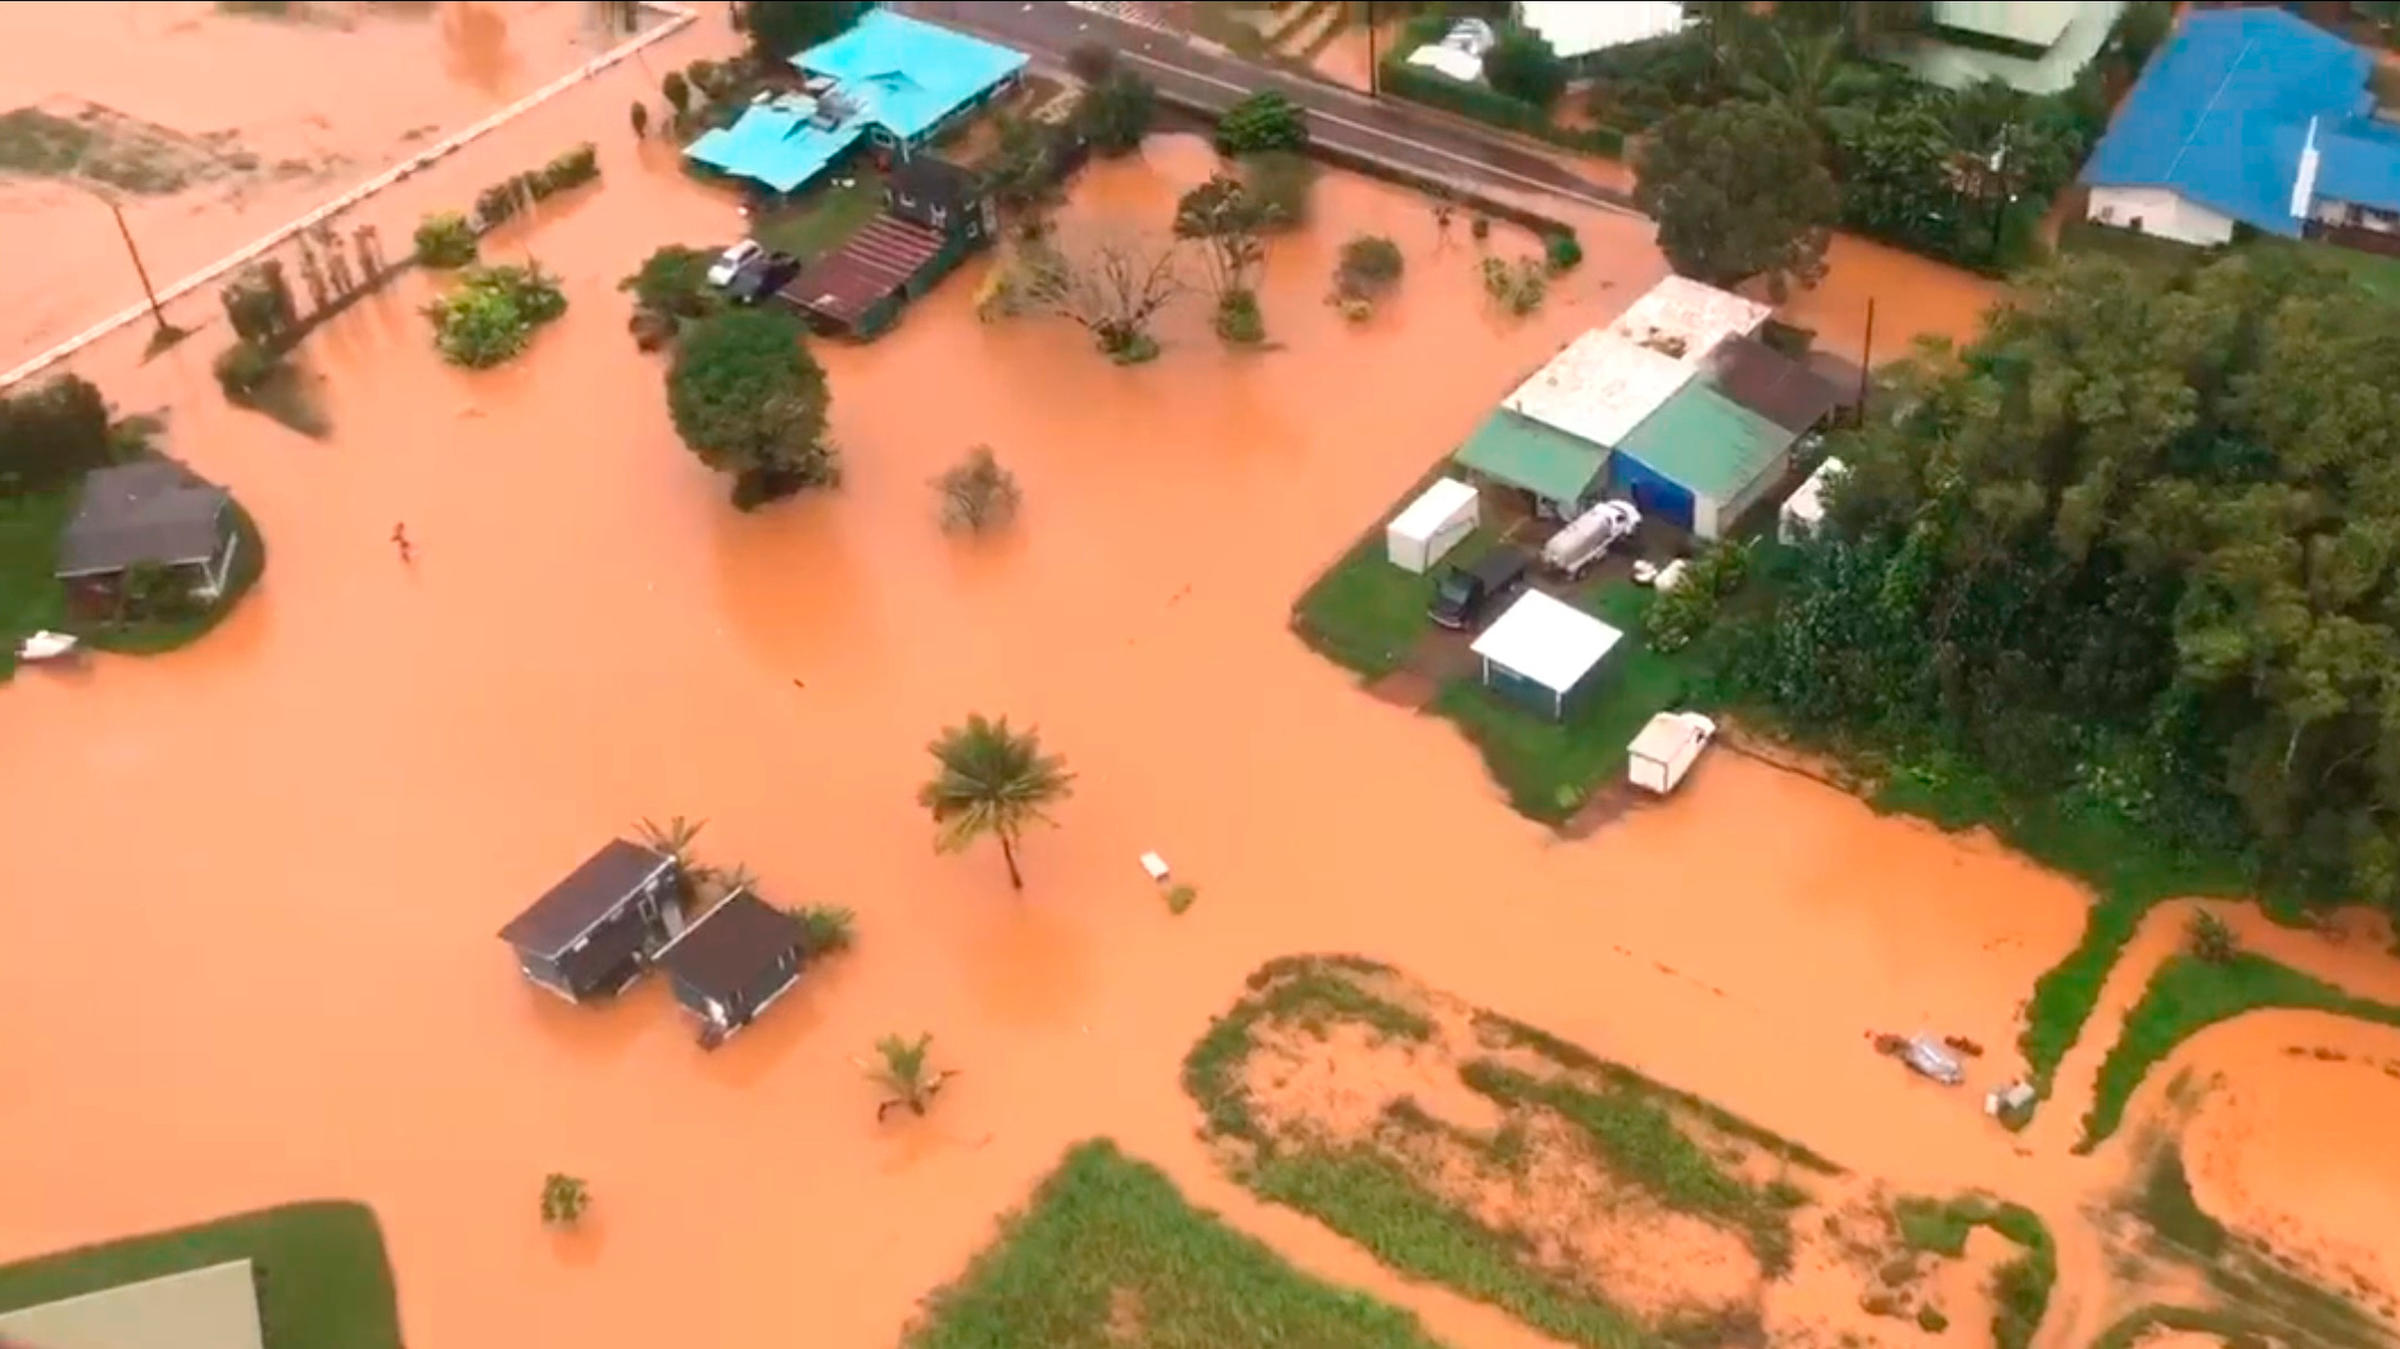 Kauai Struggles With Severe Flooding, As More Rain Is In The Forecast